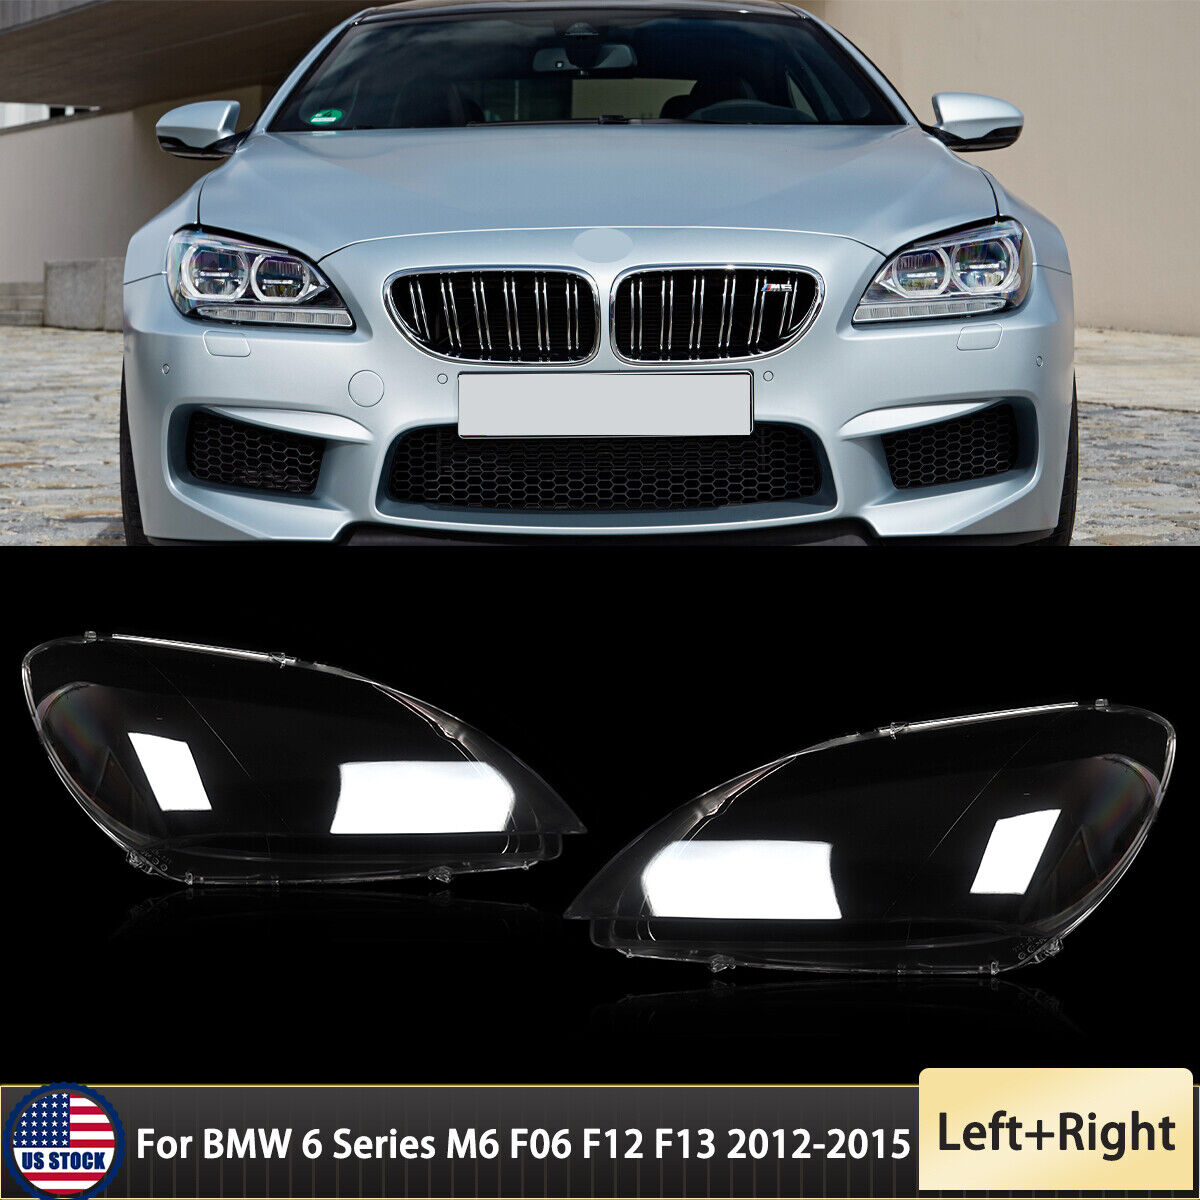 For BMW 6 Series M6 F06 F12 F13 640i 650i Front Headlight Lens Cover Shell Clear